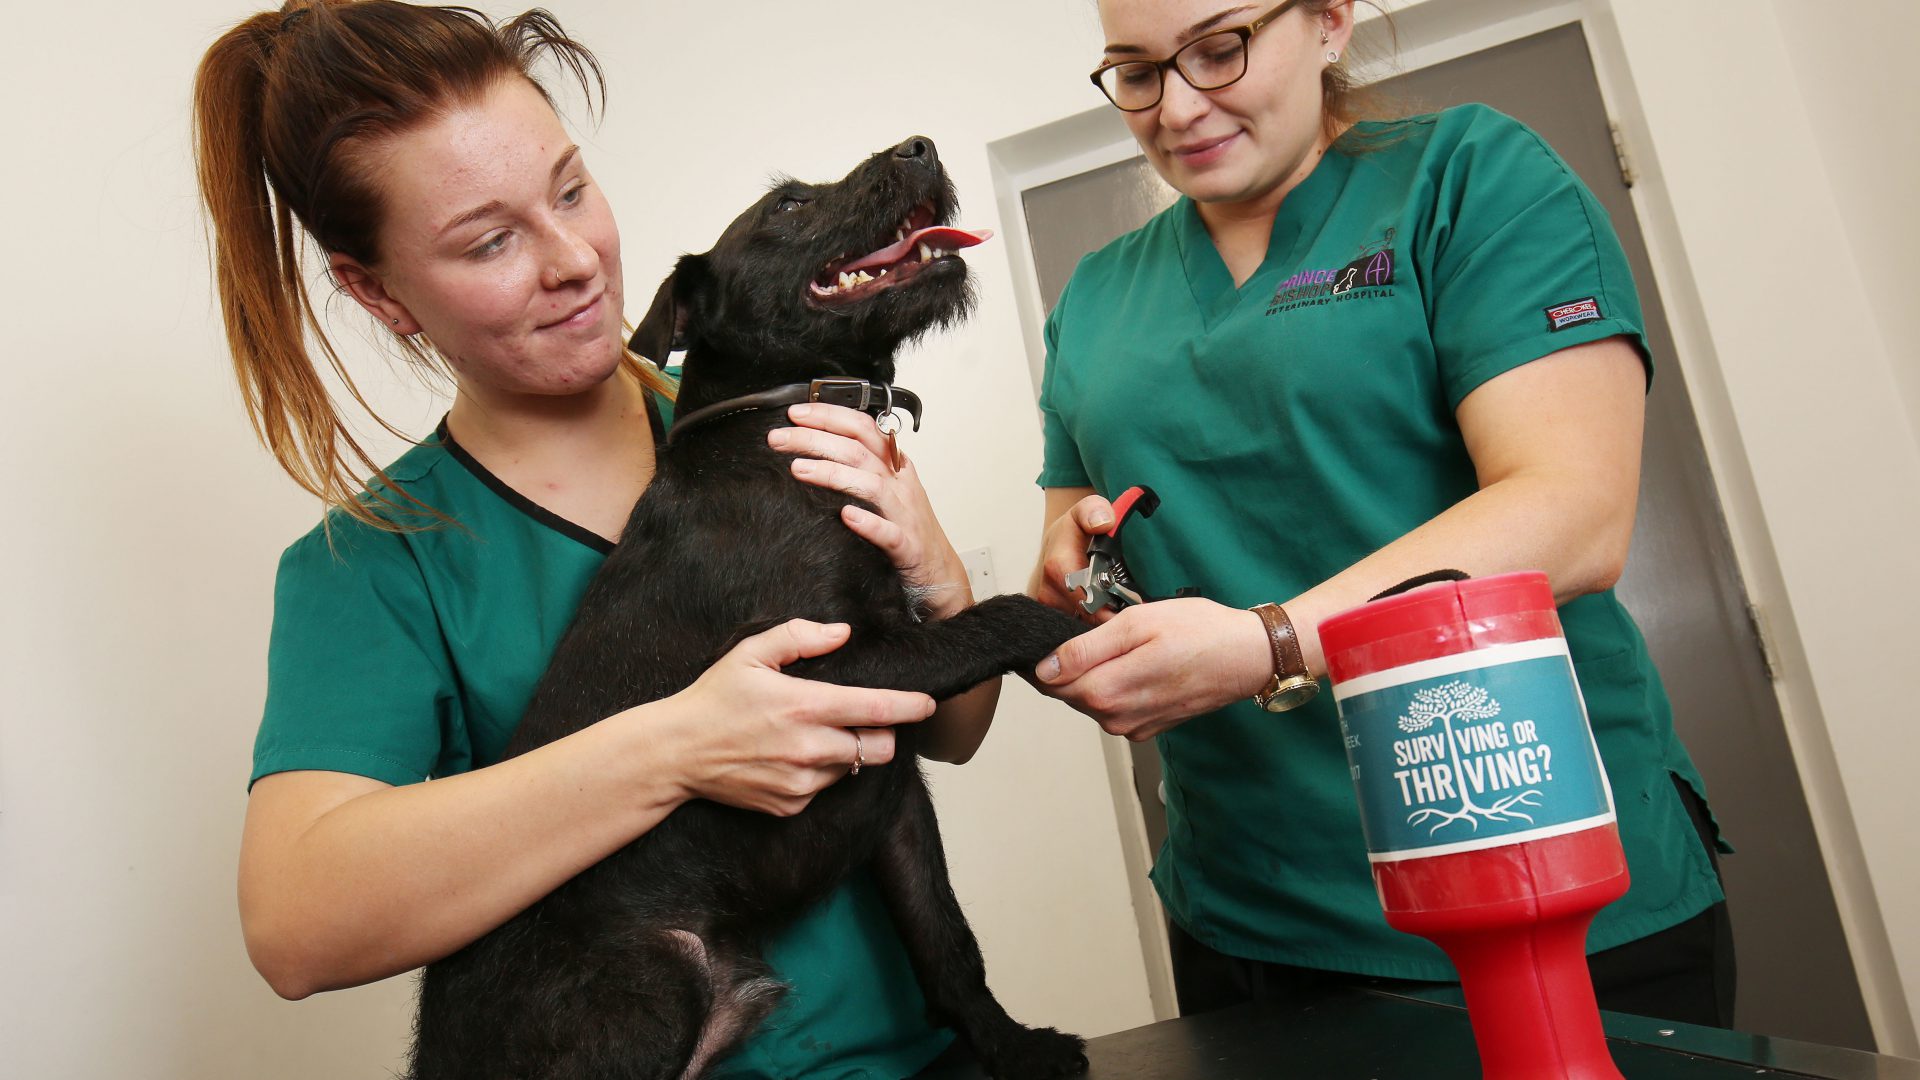 Staff wellbeing at heart of County Durham vets fundraising drive